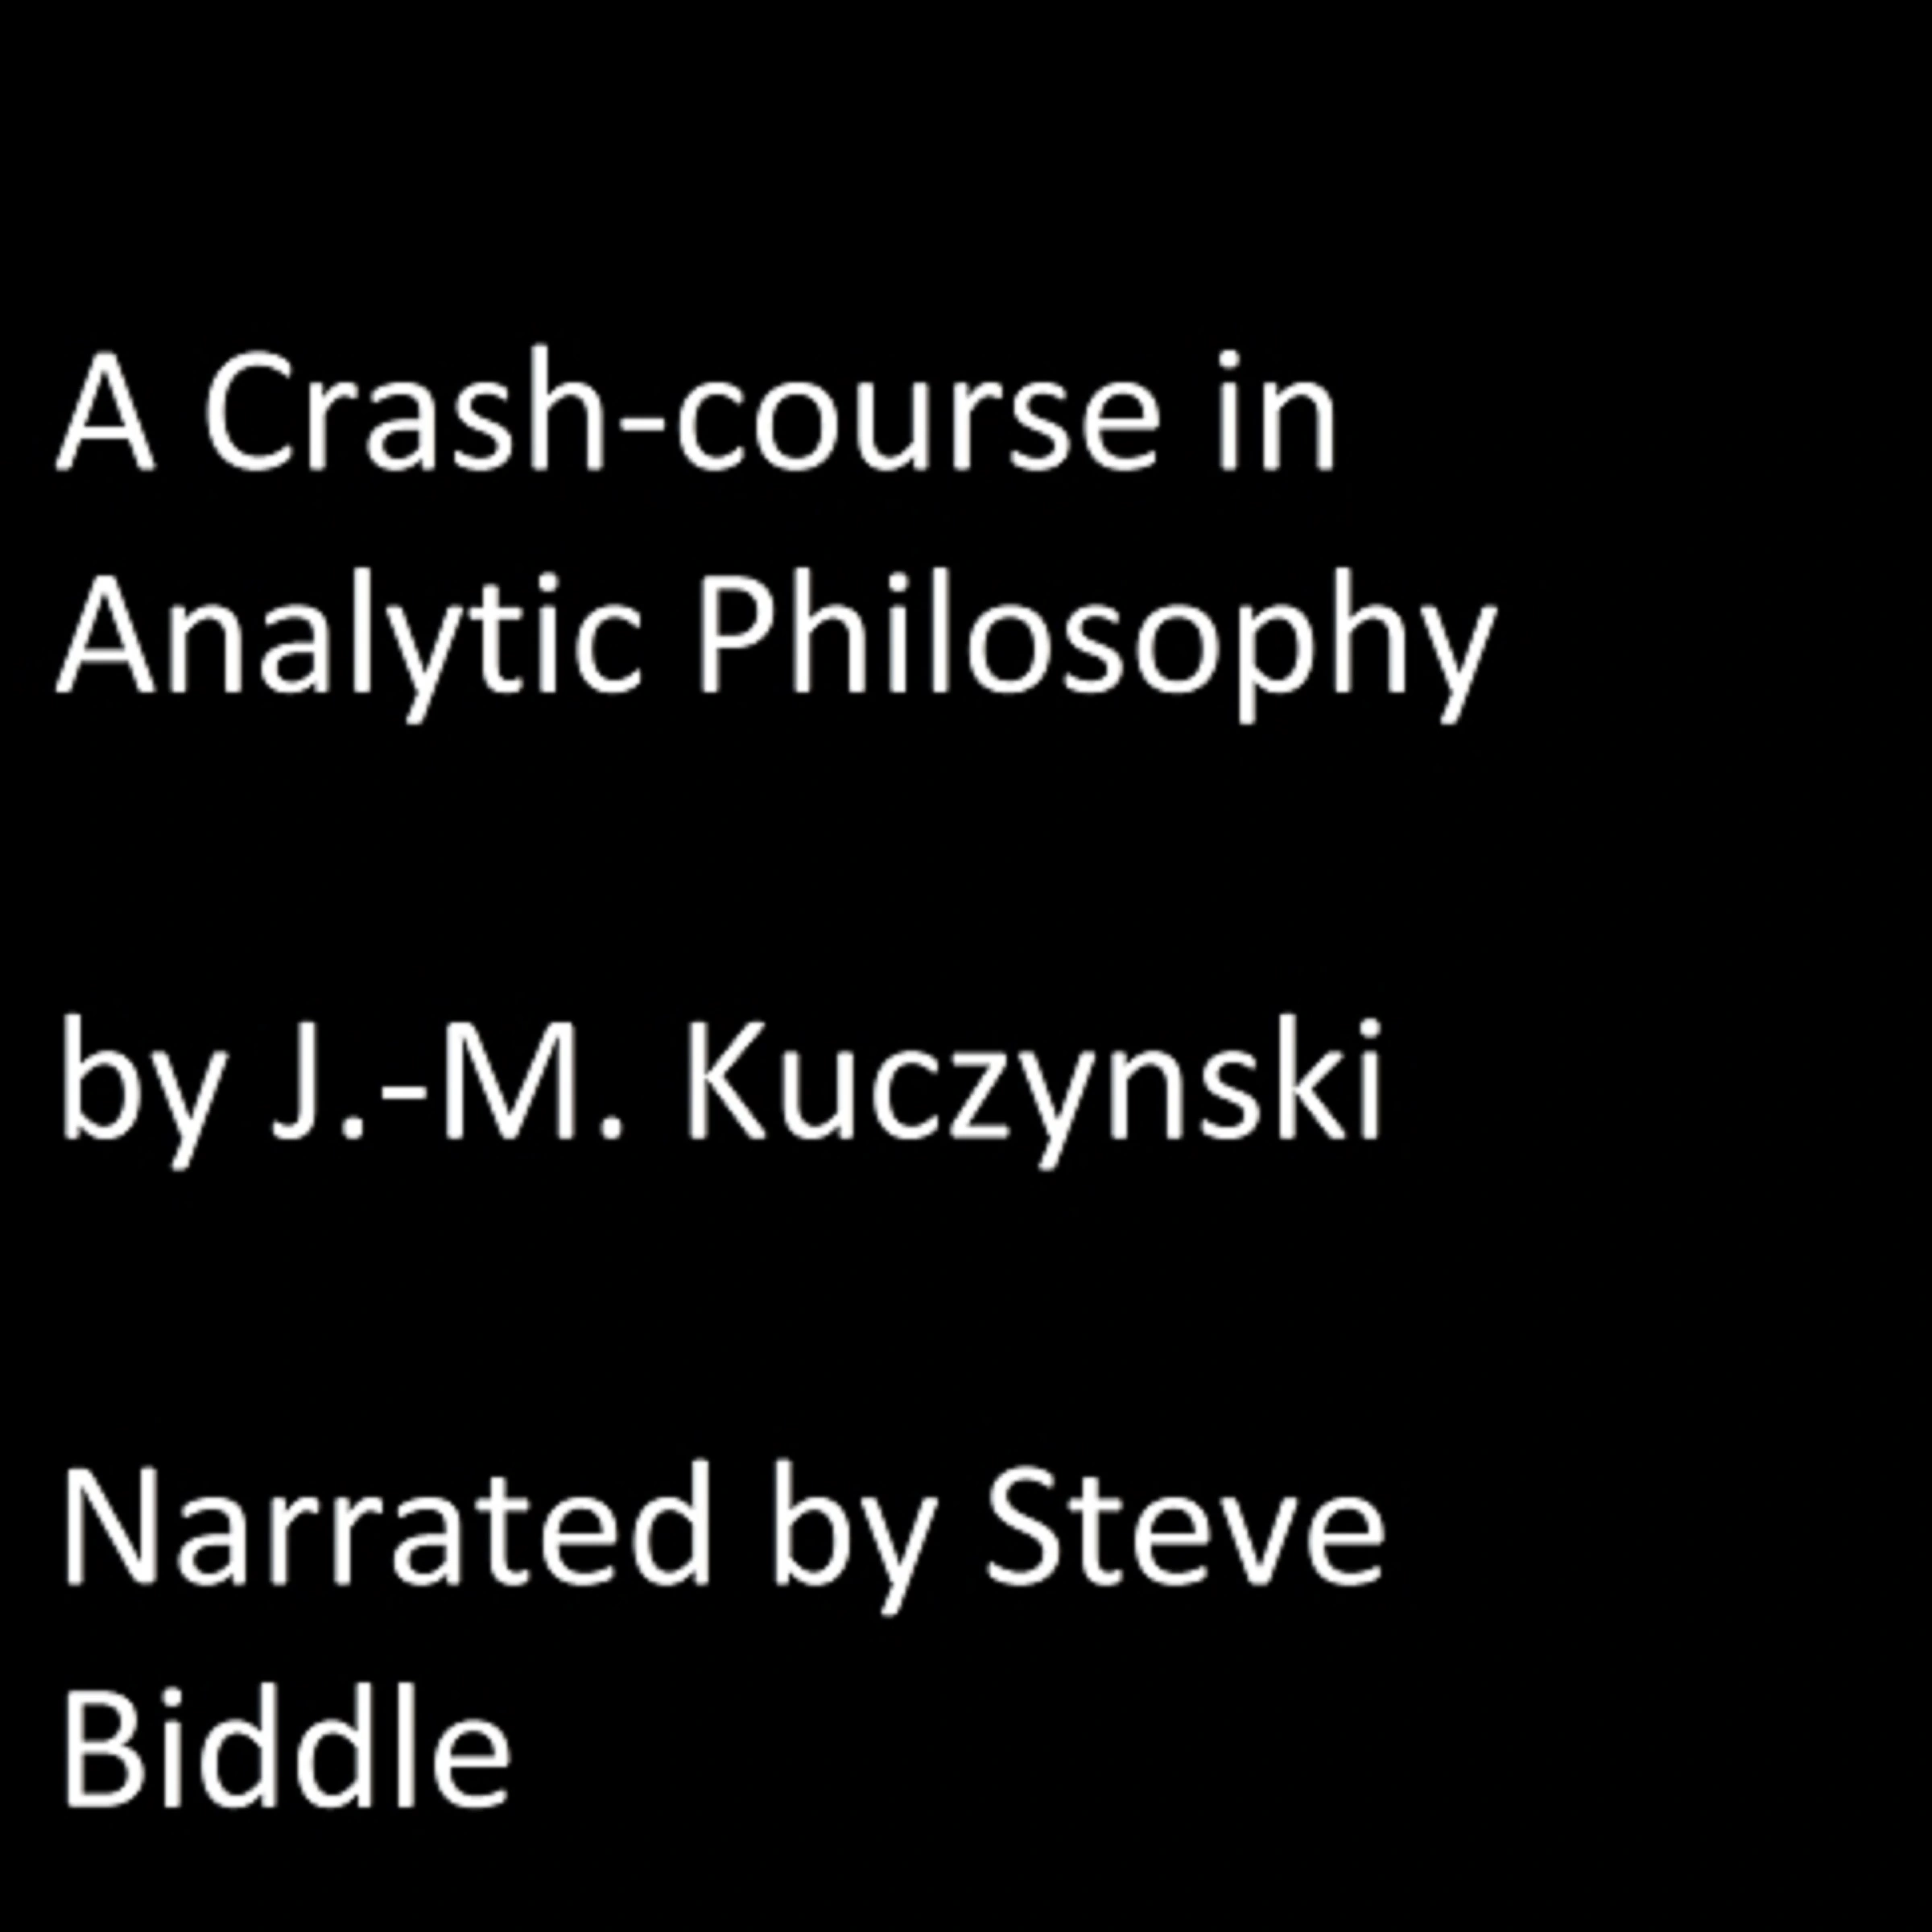 A Crash Course in Analytic Philosophy Audiobook by J.-M. Kuczynski